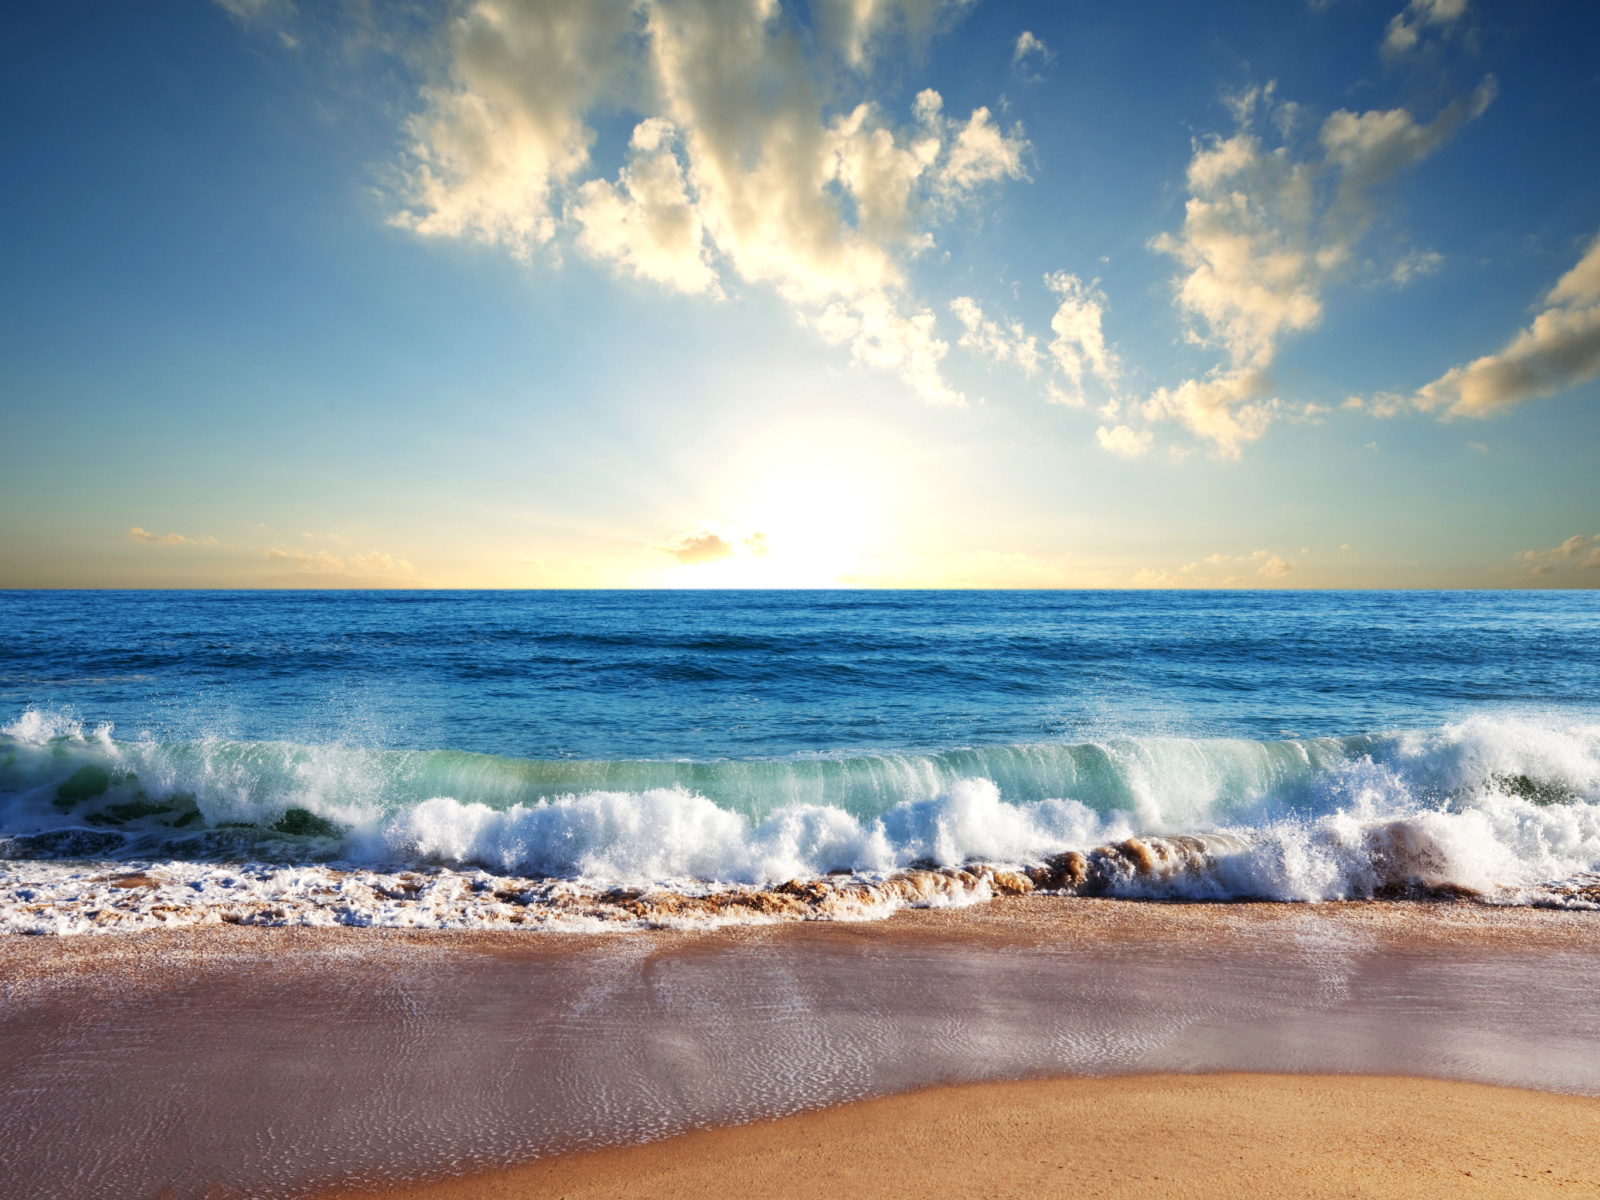 Beach and Waves wallpaper 1600x1200